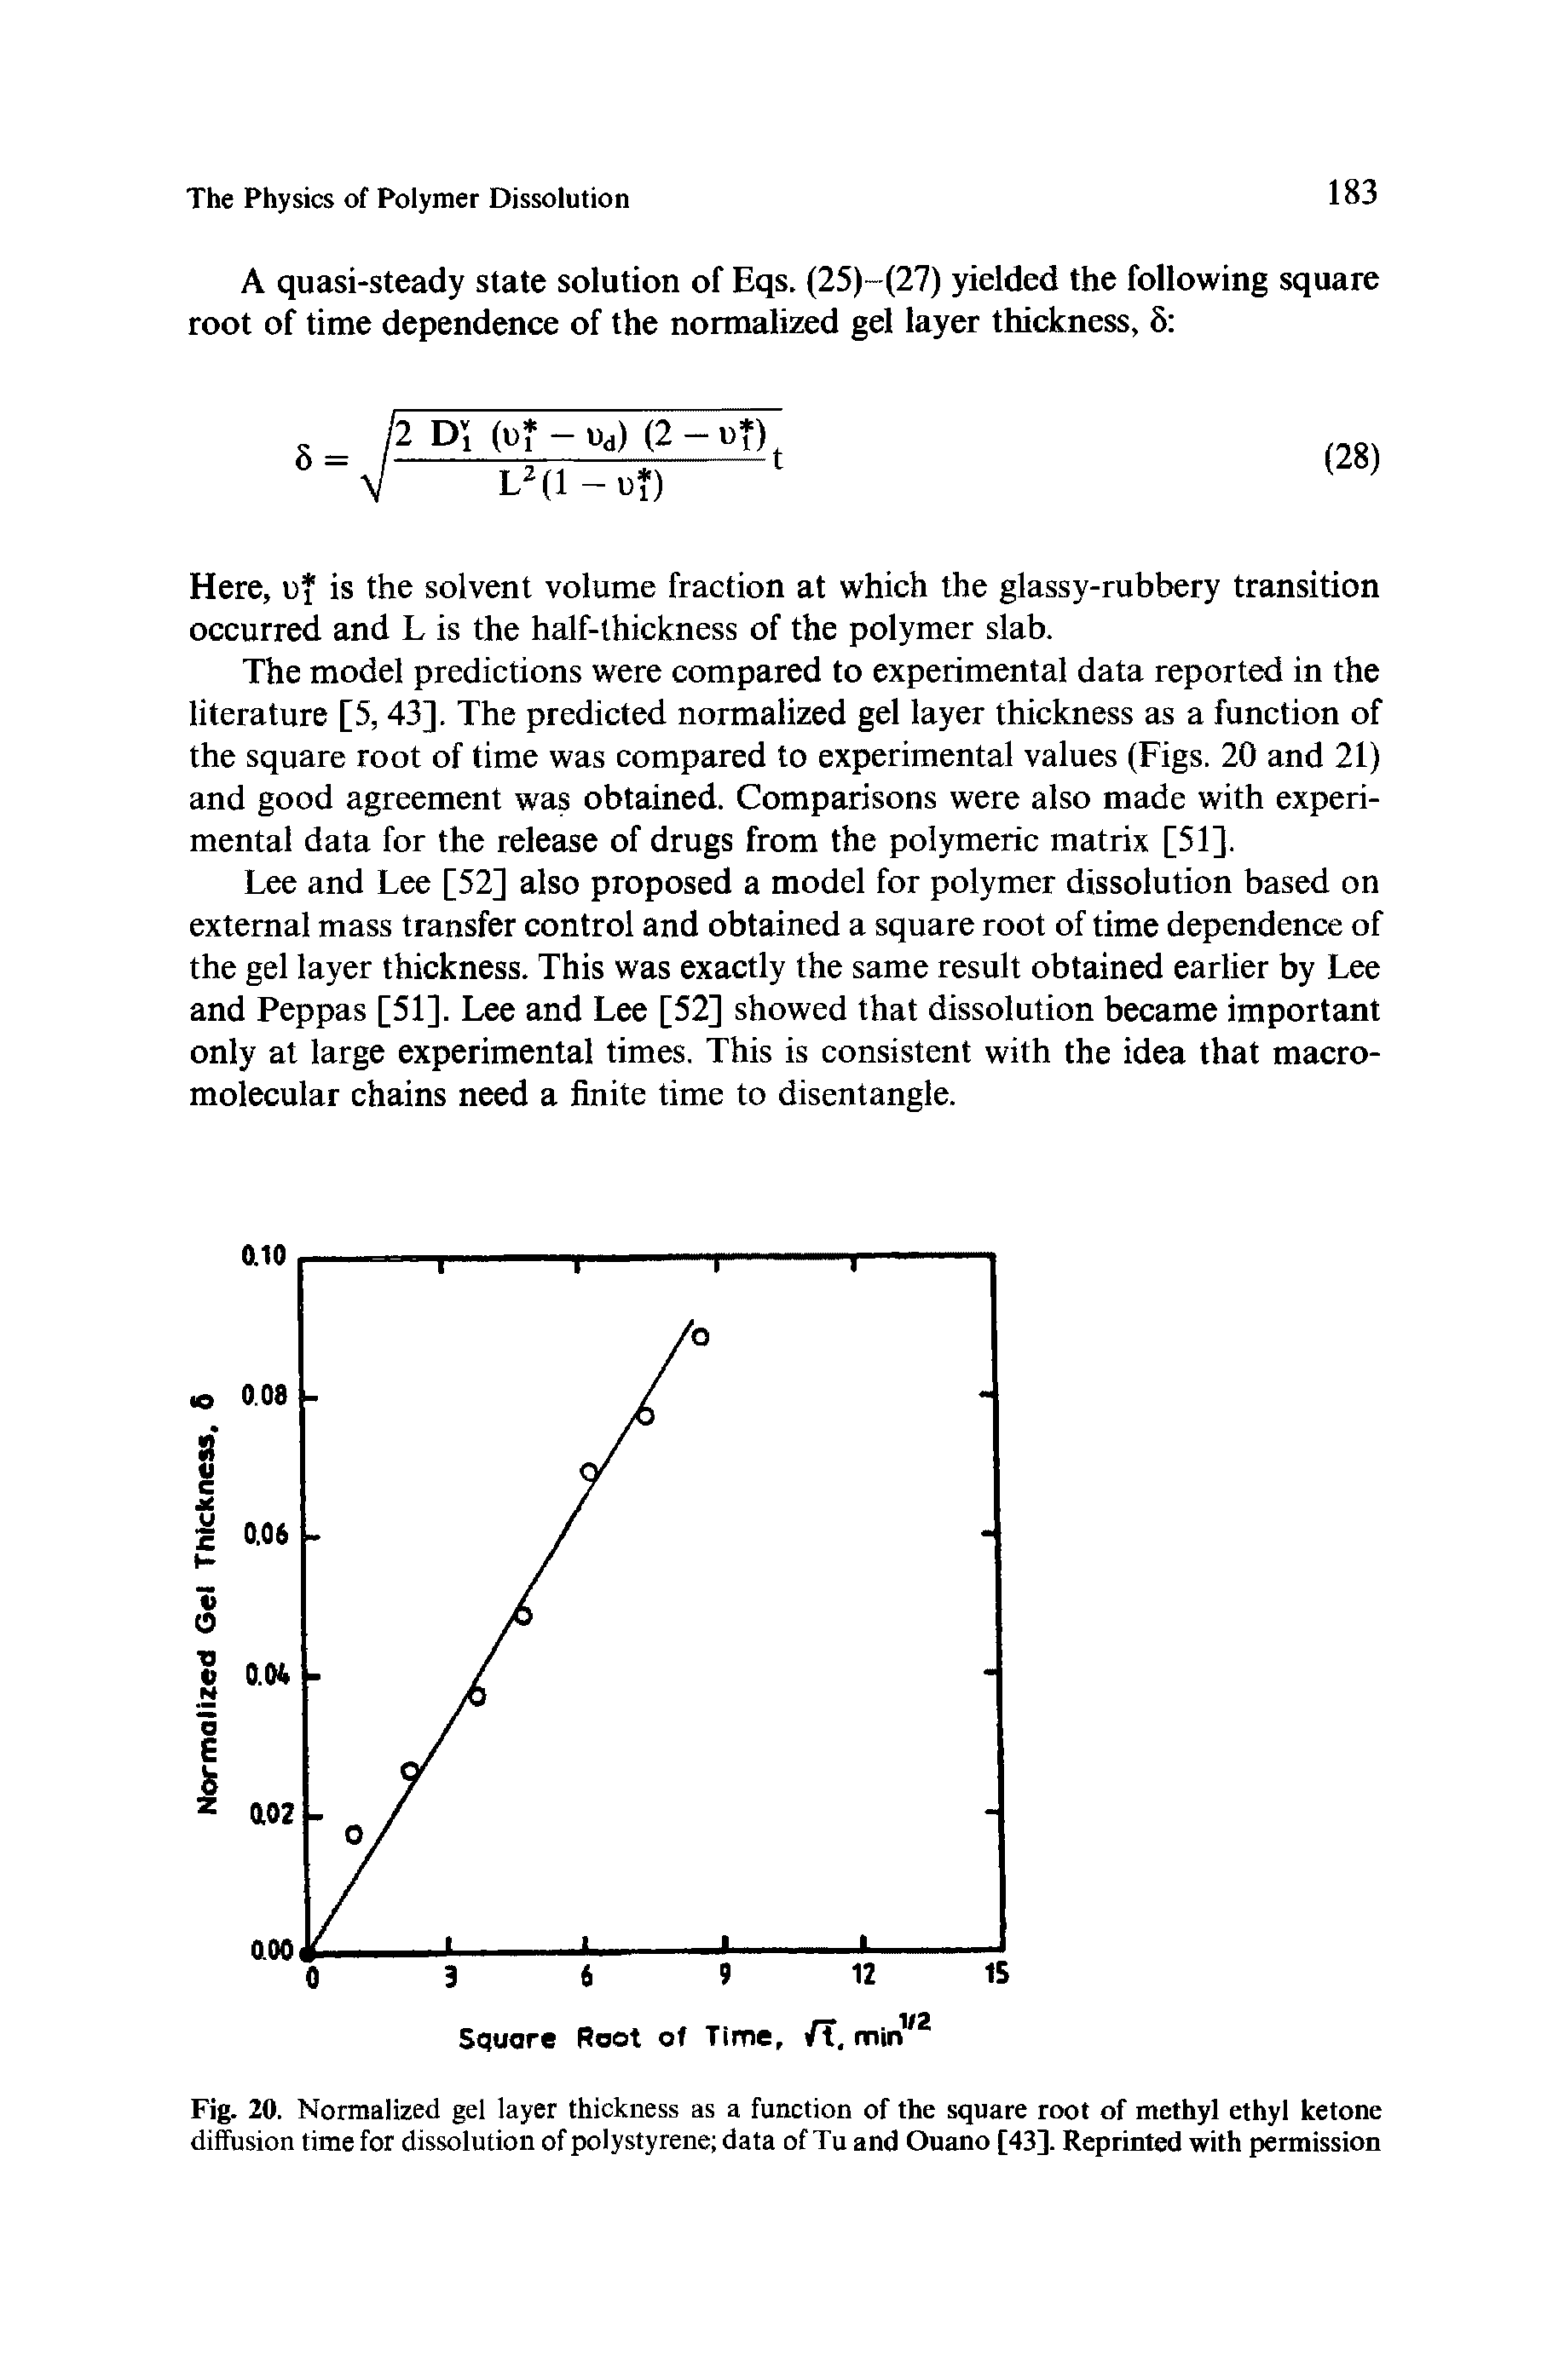 Fig. 20. Normalized gel layer thickness as a function of the square root of methyl ethyl ketone diffusion time for dissolution of polystyrene data of Tu and Ouano [43]. Reprinted with permission...